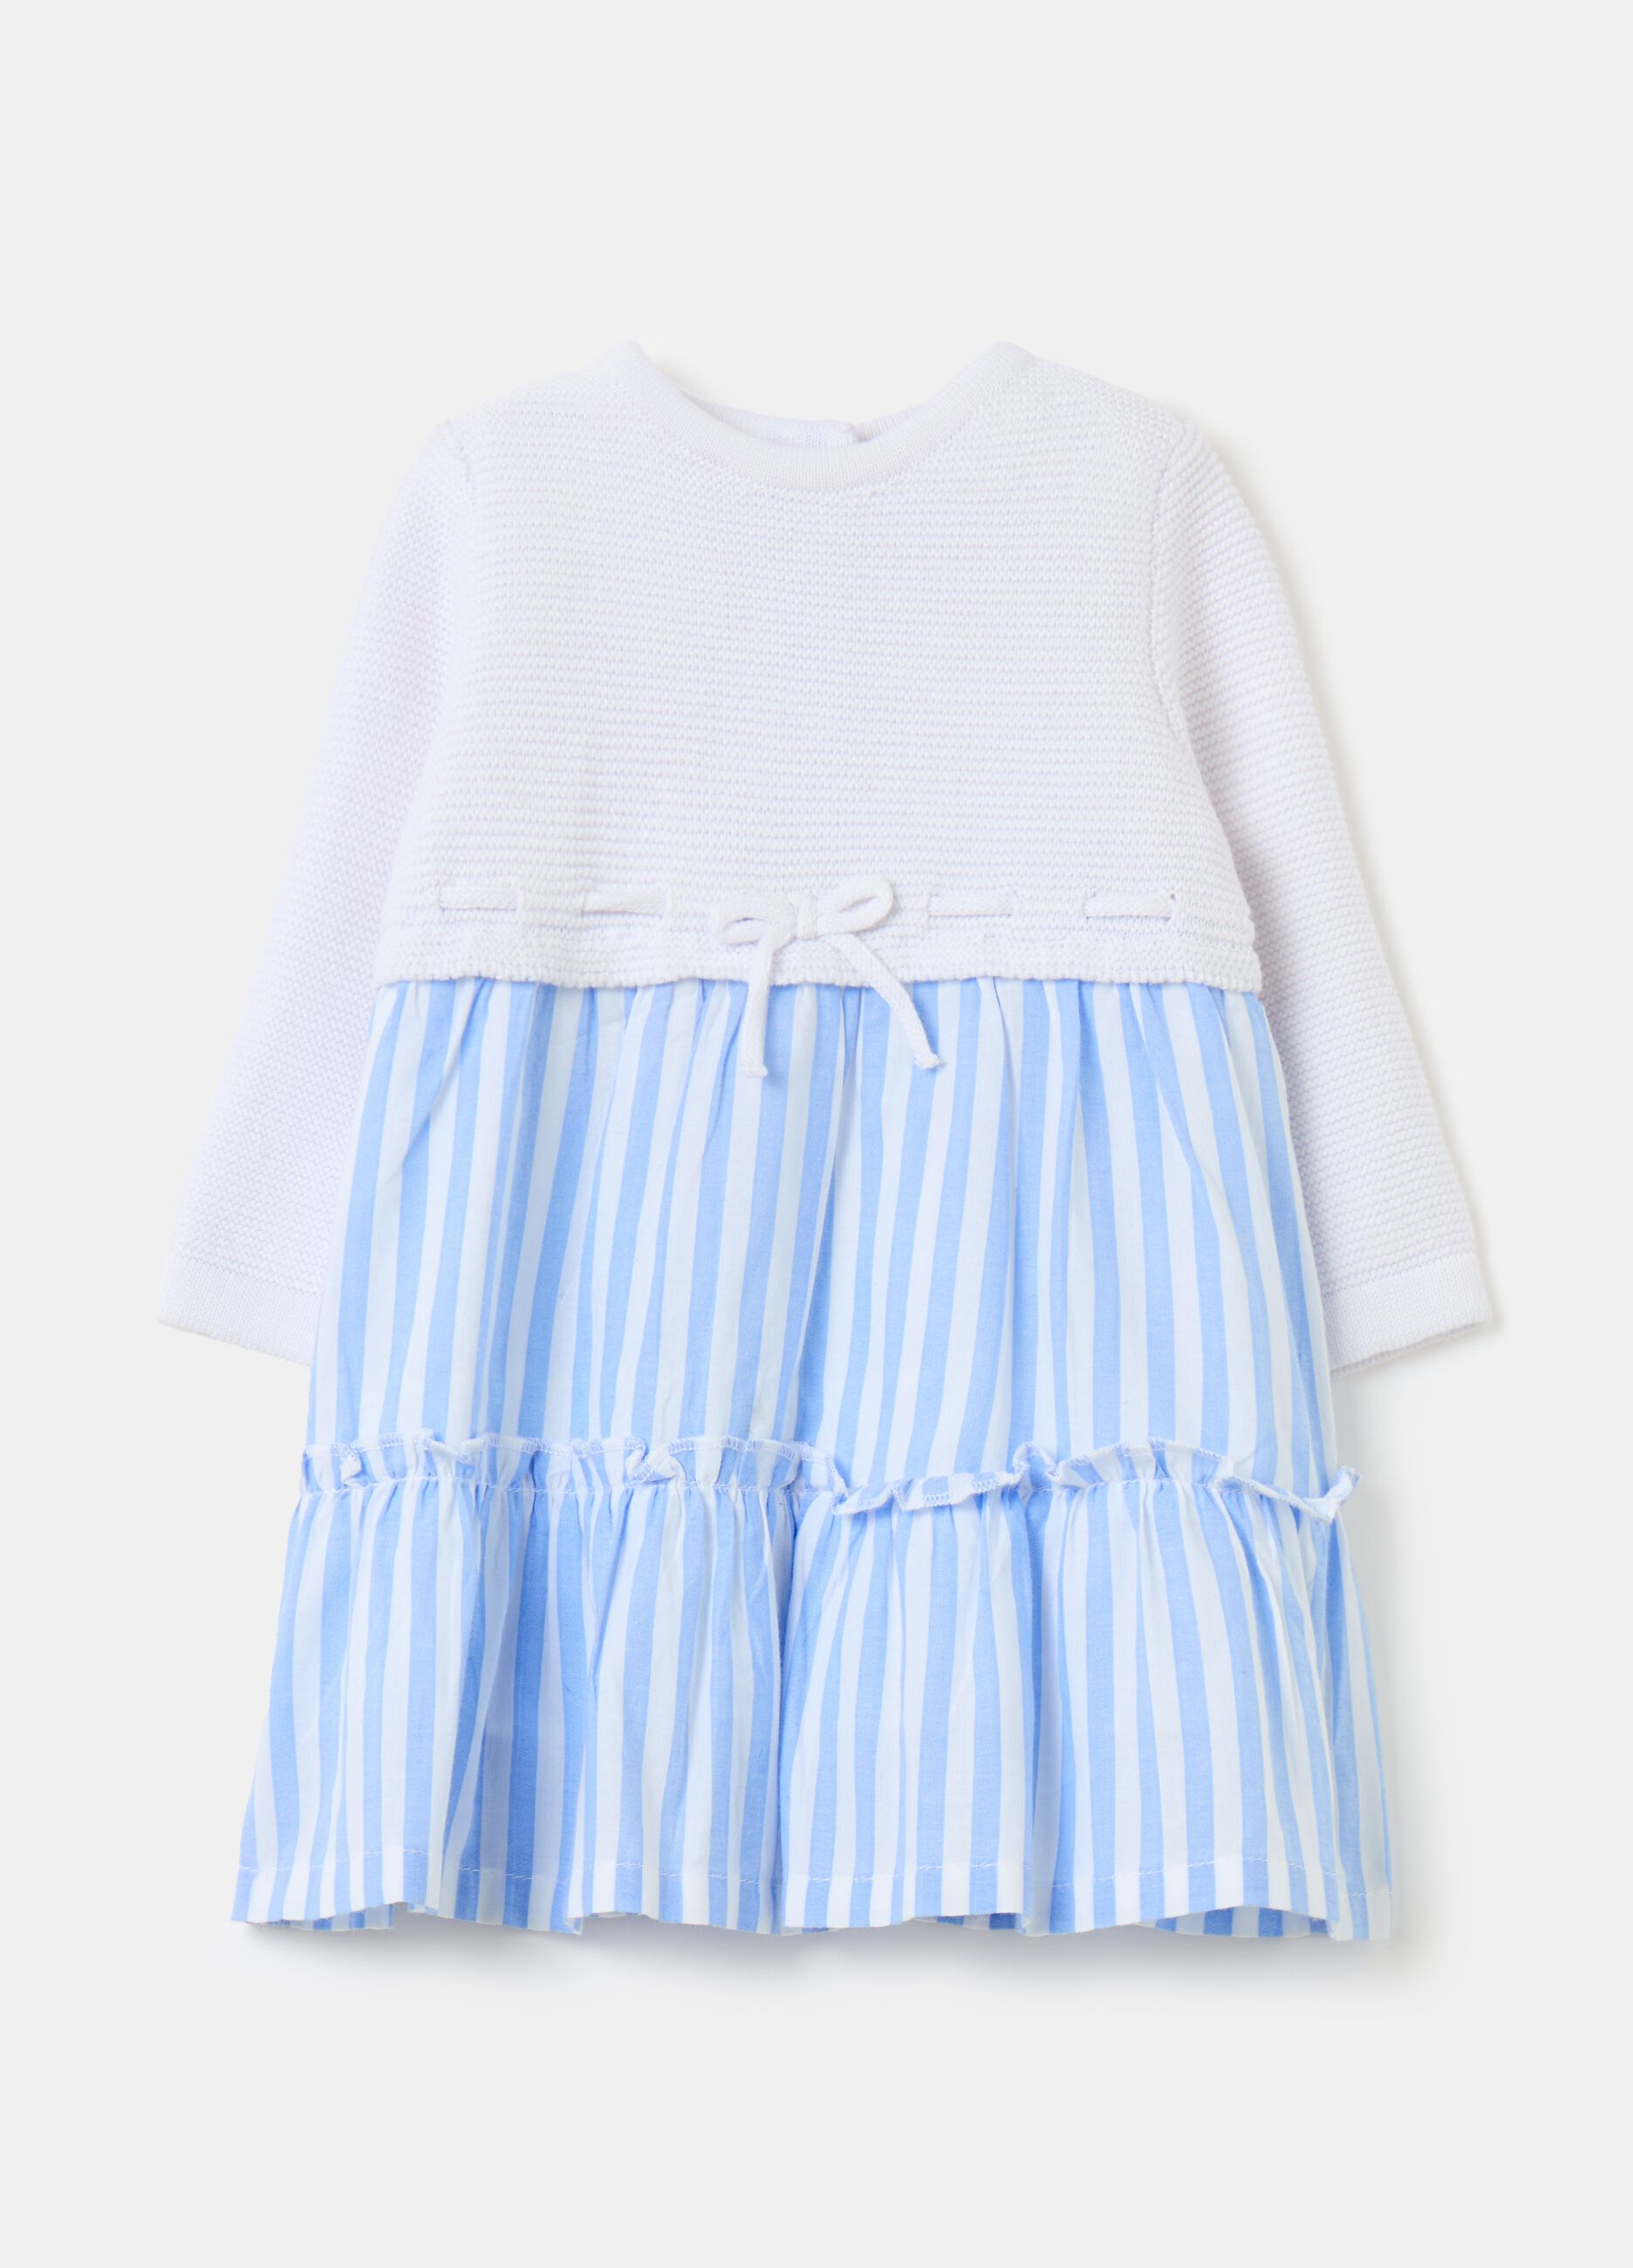 Two-part dress with striped skirt